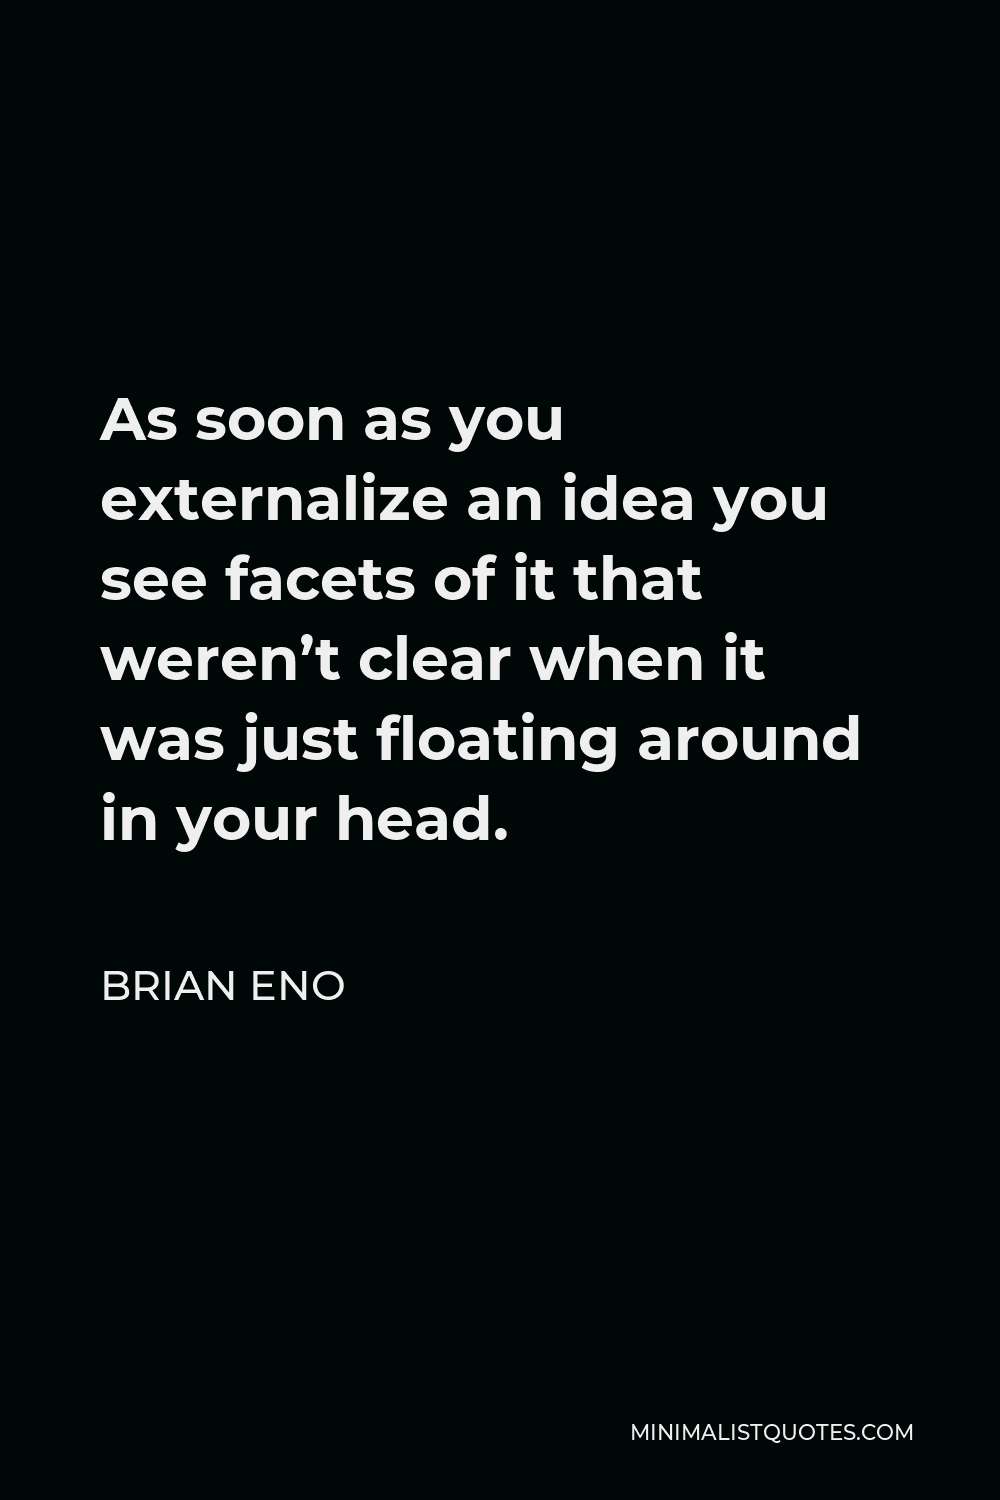 Brian Eno Quote - As soon as you externalize an idea you see facets of it that weren’t clear when it was just floating around in your head.